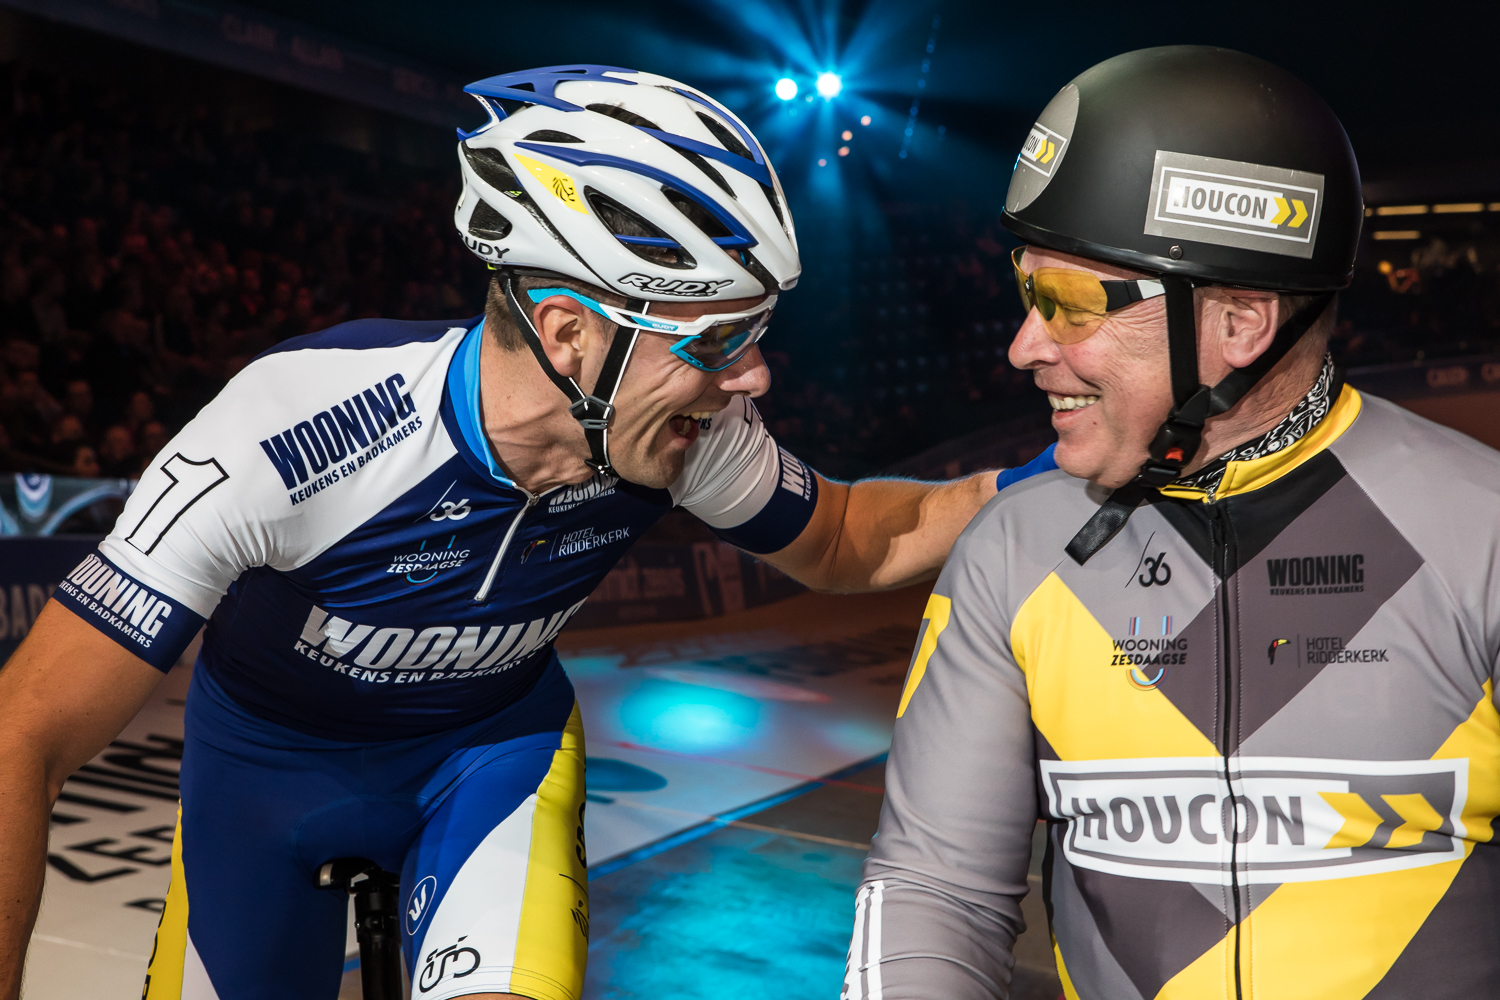 Wooning Zesdaagse 2019 in Rotterdam Ahoy